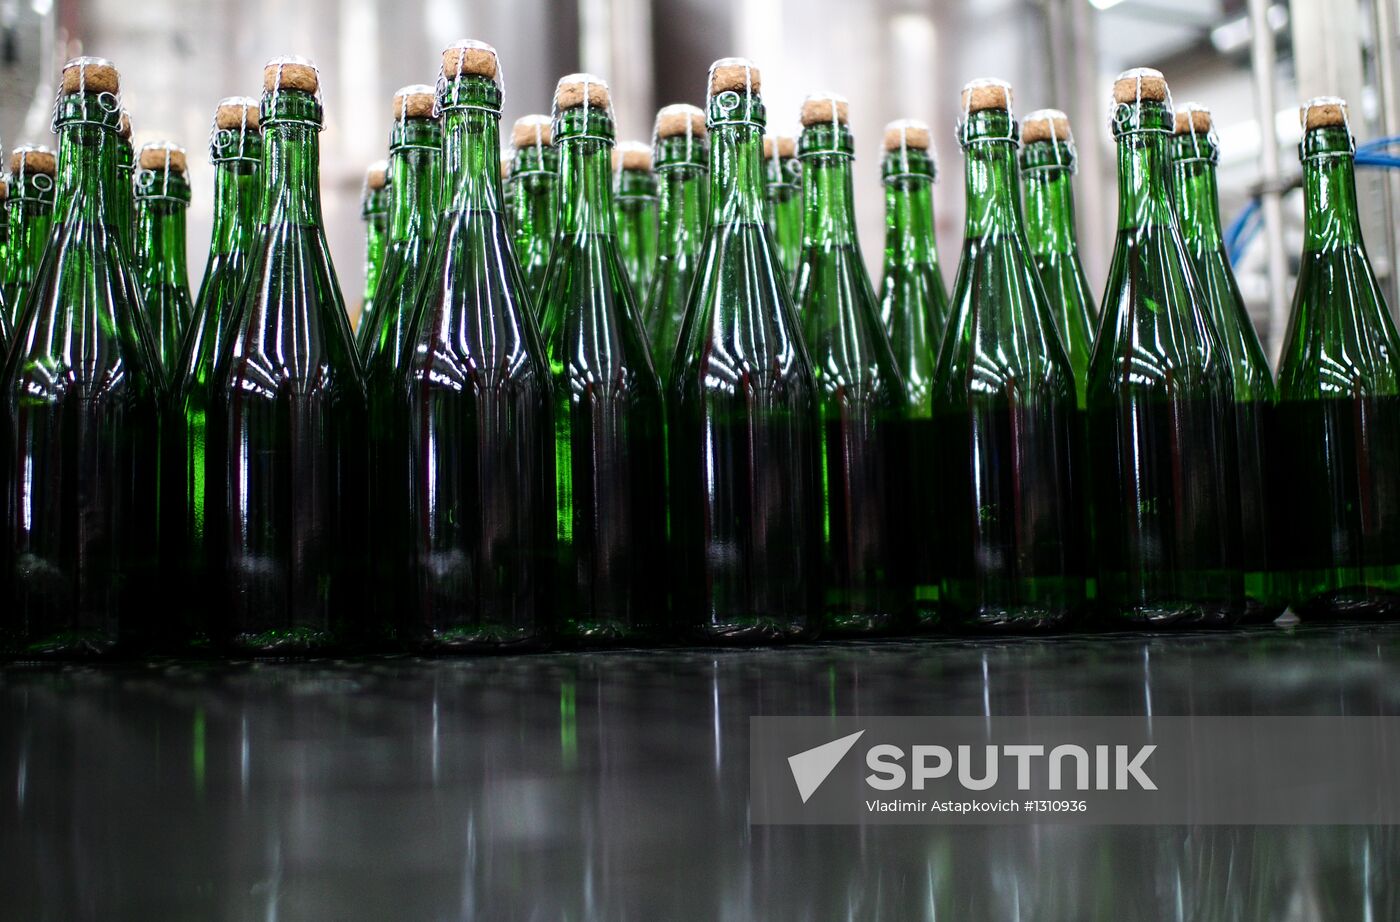 Kornet Moscow Sparkling Wines Plant